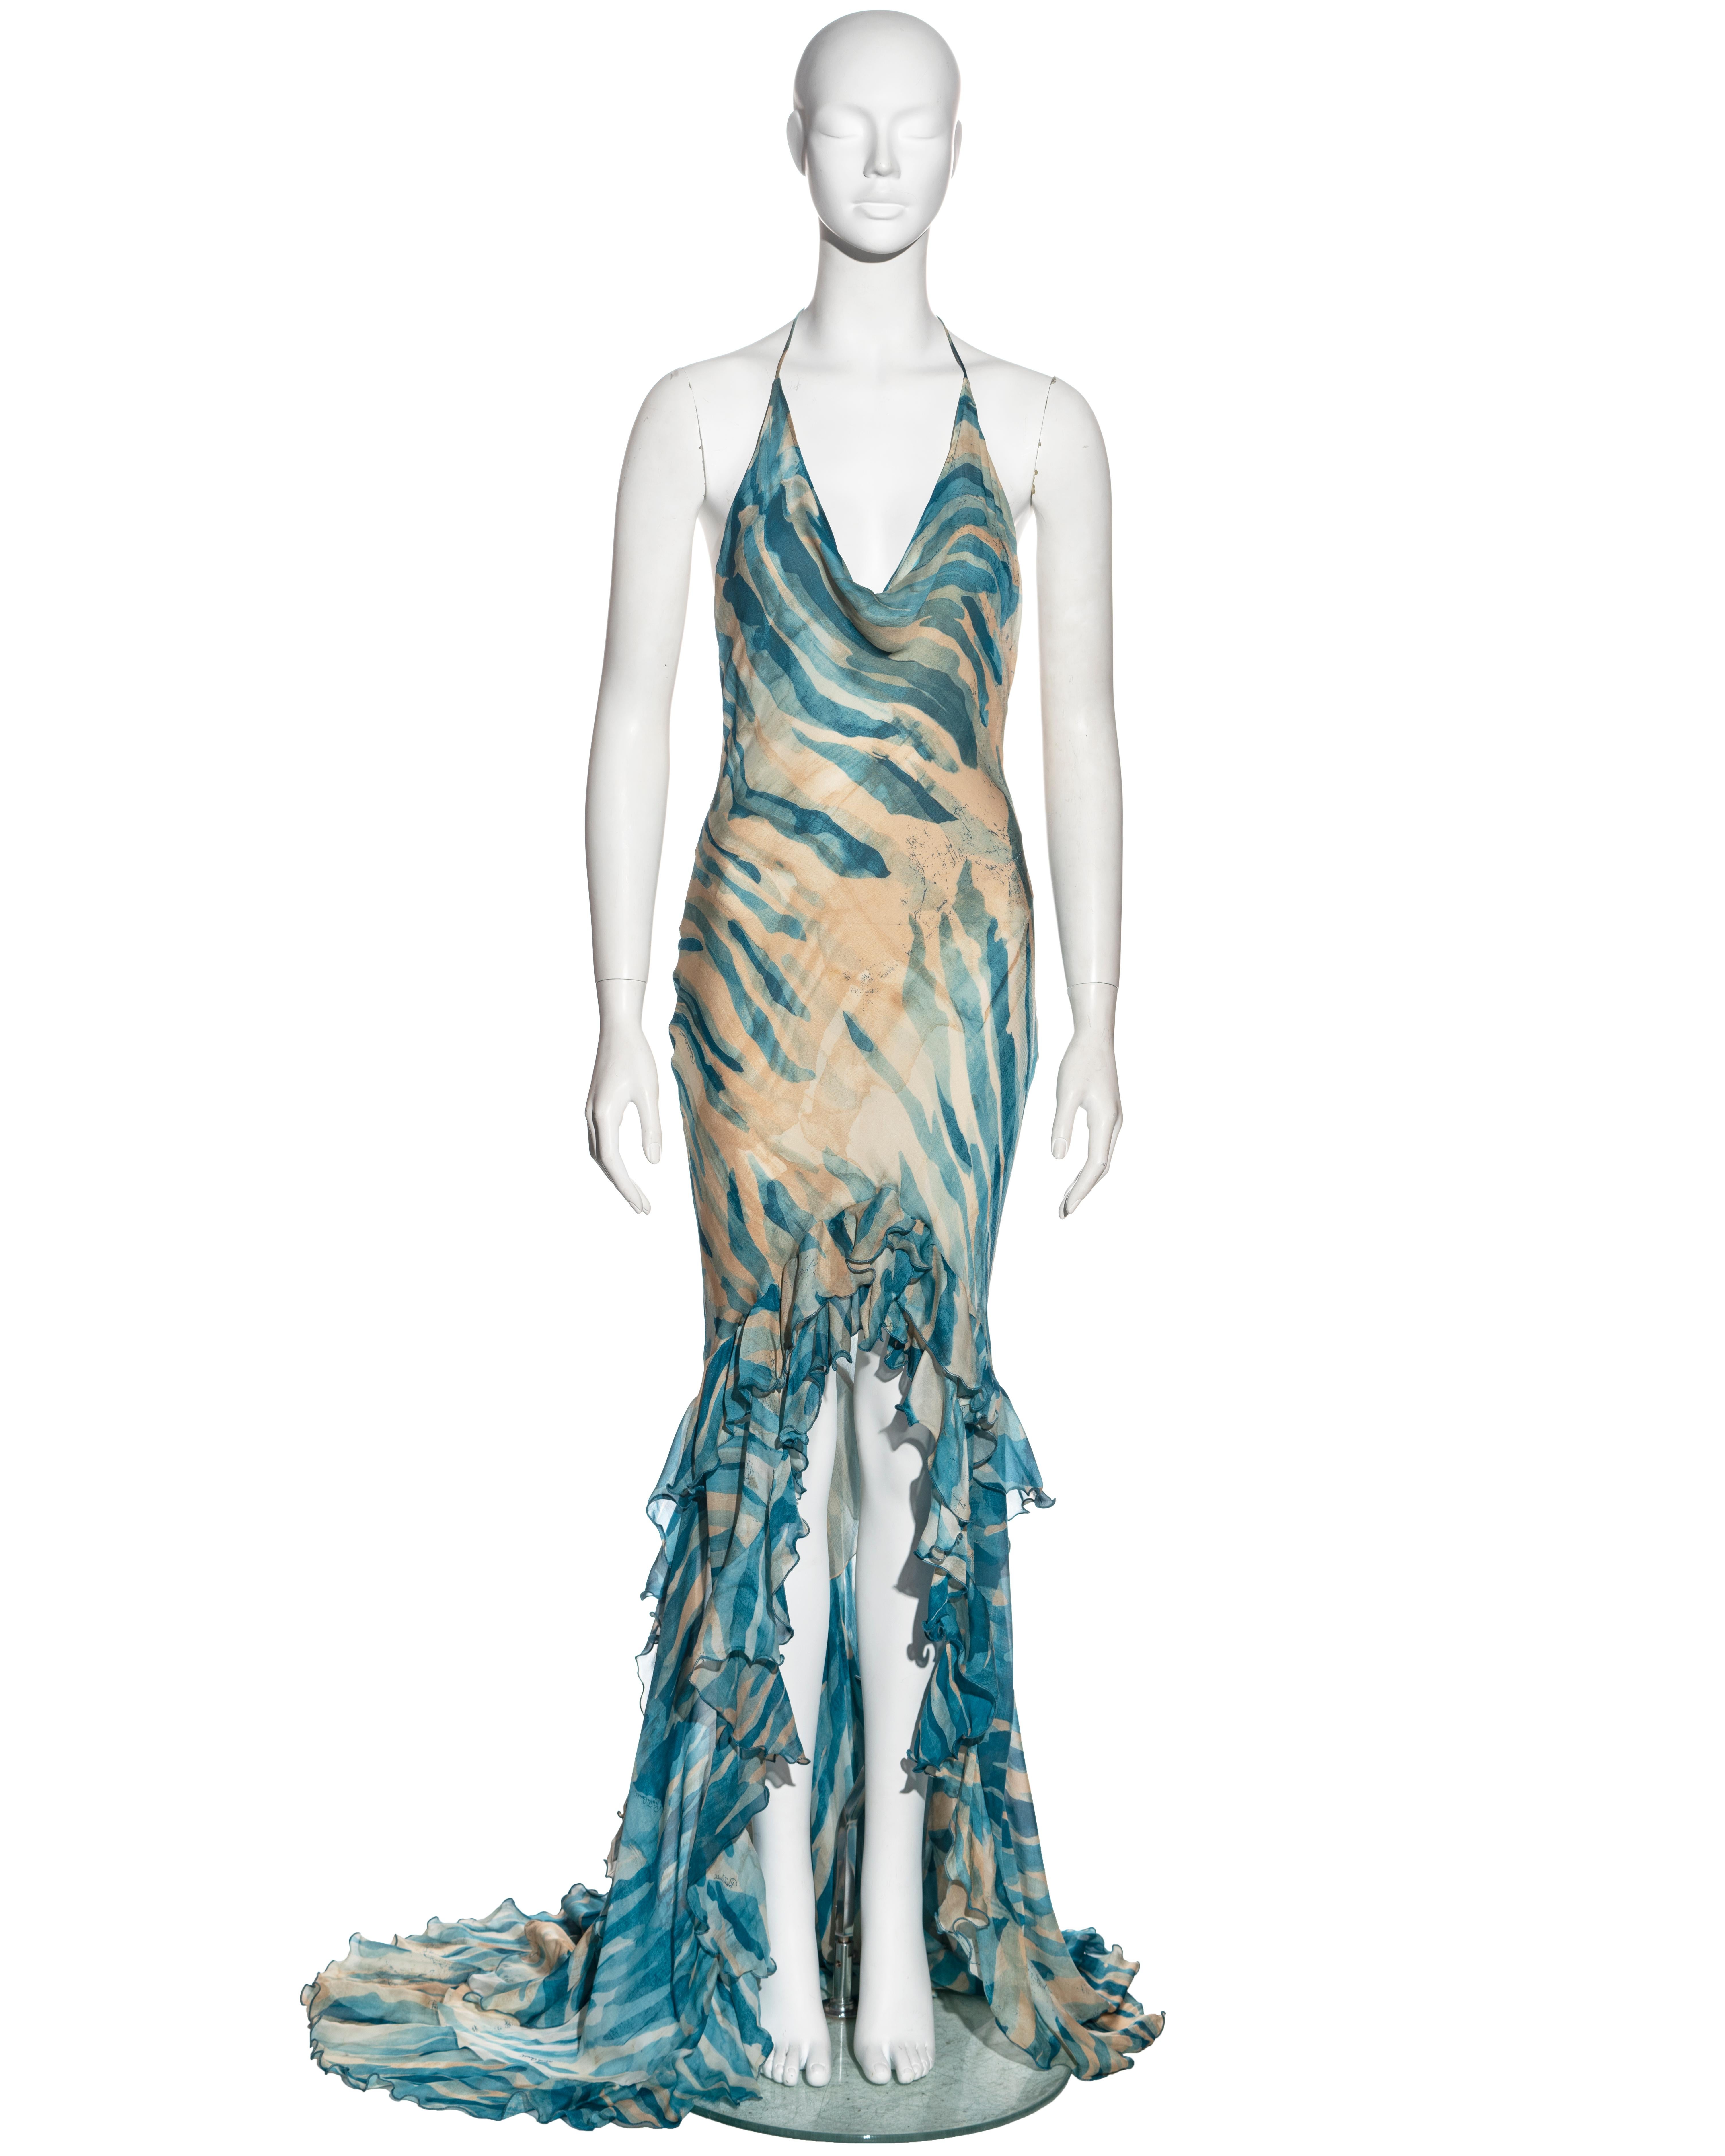 ▪ Roberto Cavalli evening dress 
▪ Sold by One of a Kind Archive
▪ Constructed from double-layered silk chiffon with a nude and blue painted stripe print 
▪ Halter-neck string ties with gold chain and coin charms 
▪ Cowl neck
▪ High-low ruffled